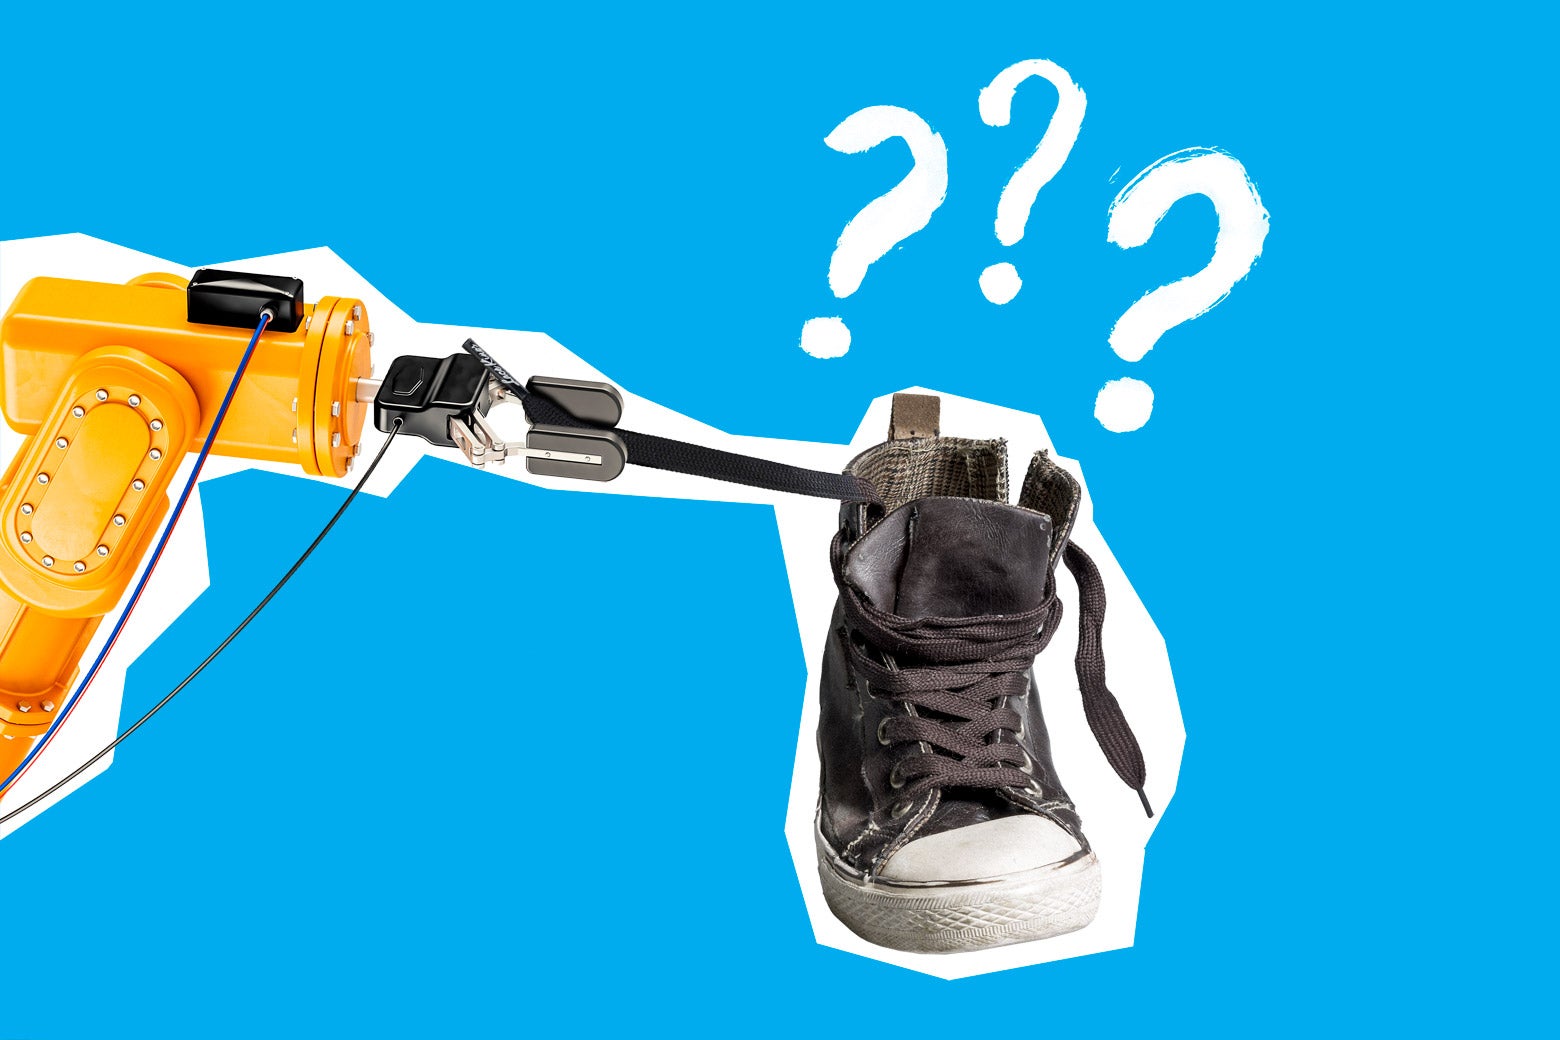 A robot trying to tie a shoelace on a shoe with question marks around it.